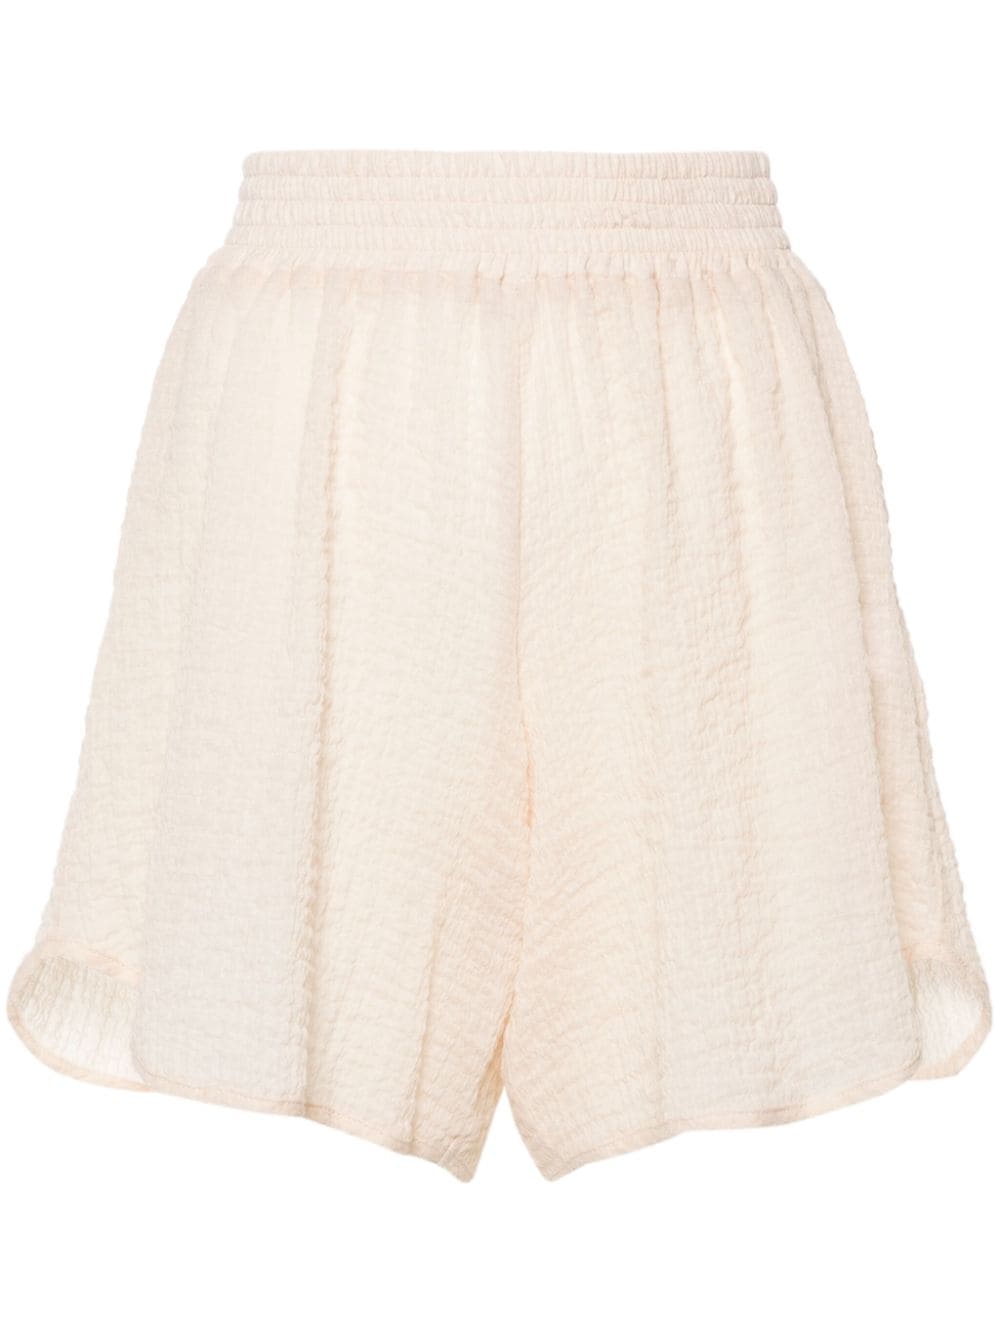 Kloe cheesecloth cotton shorts